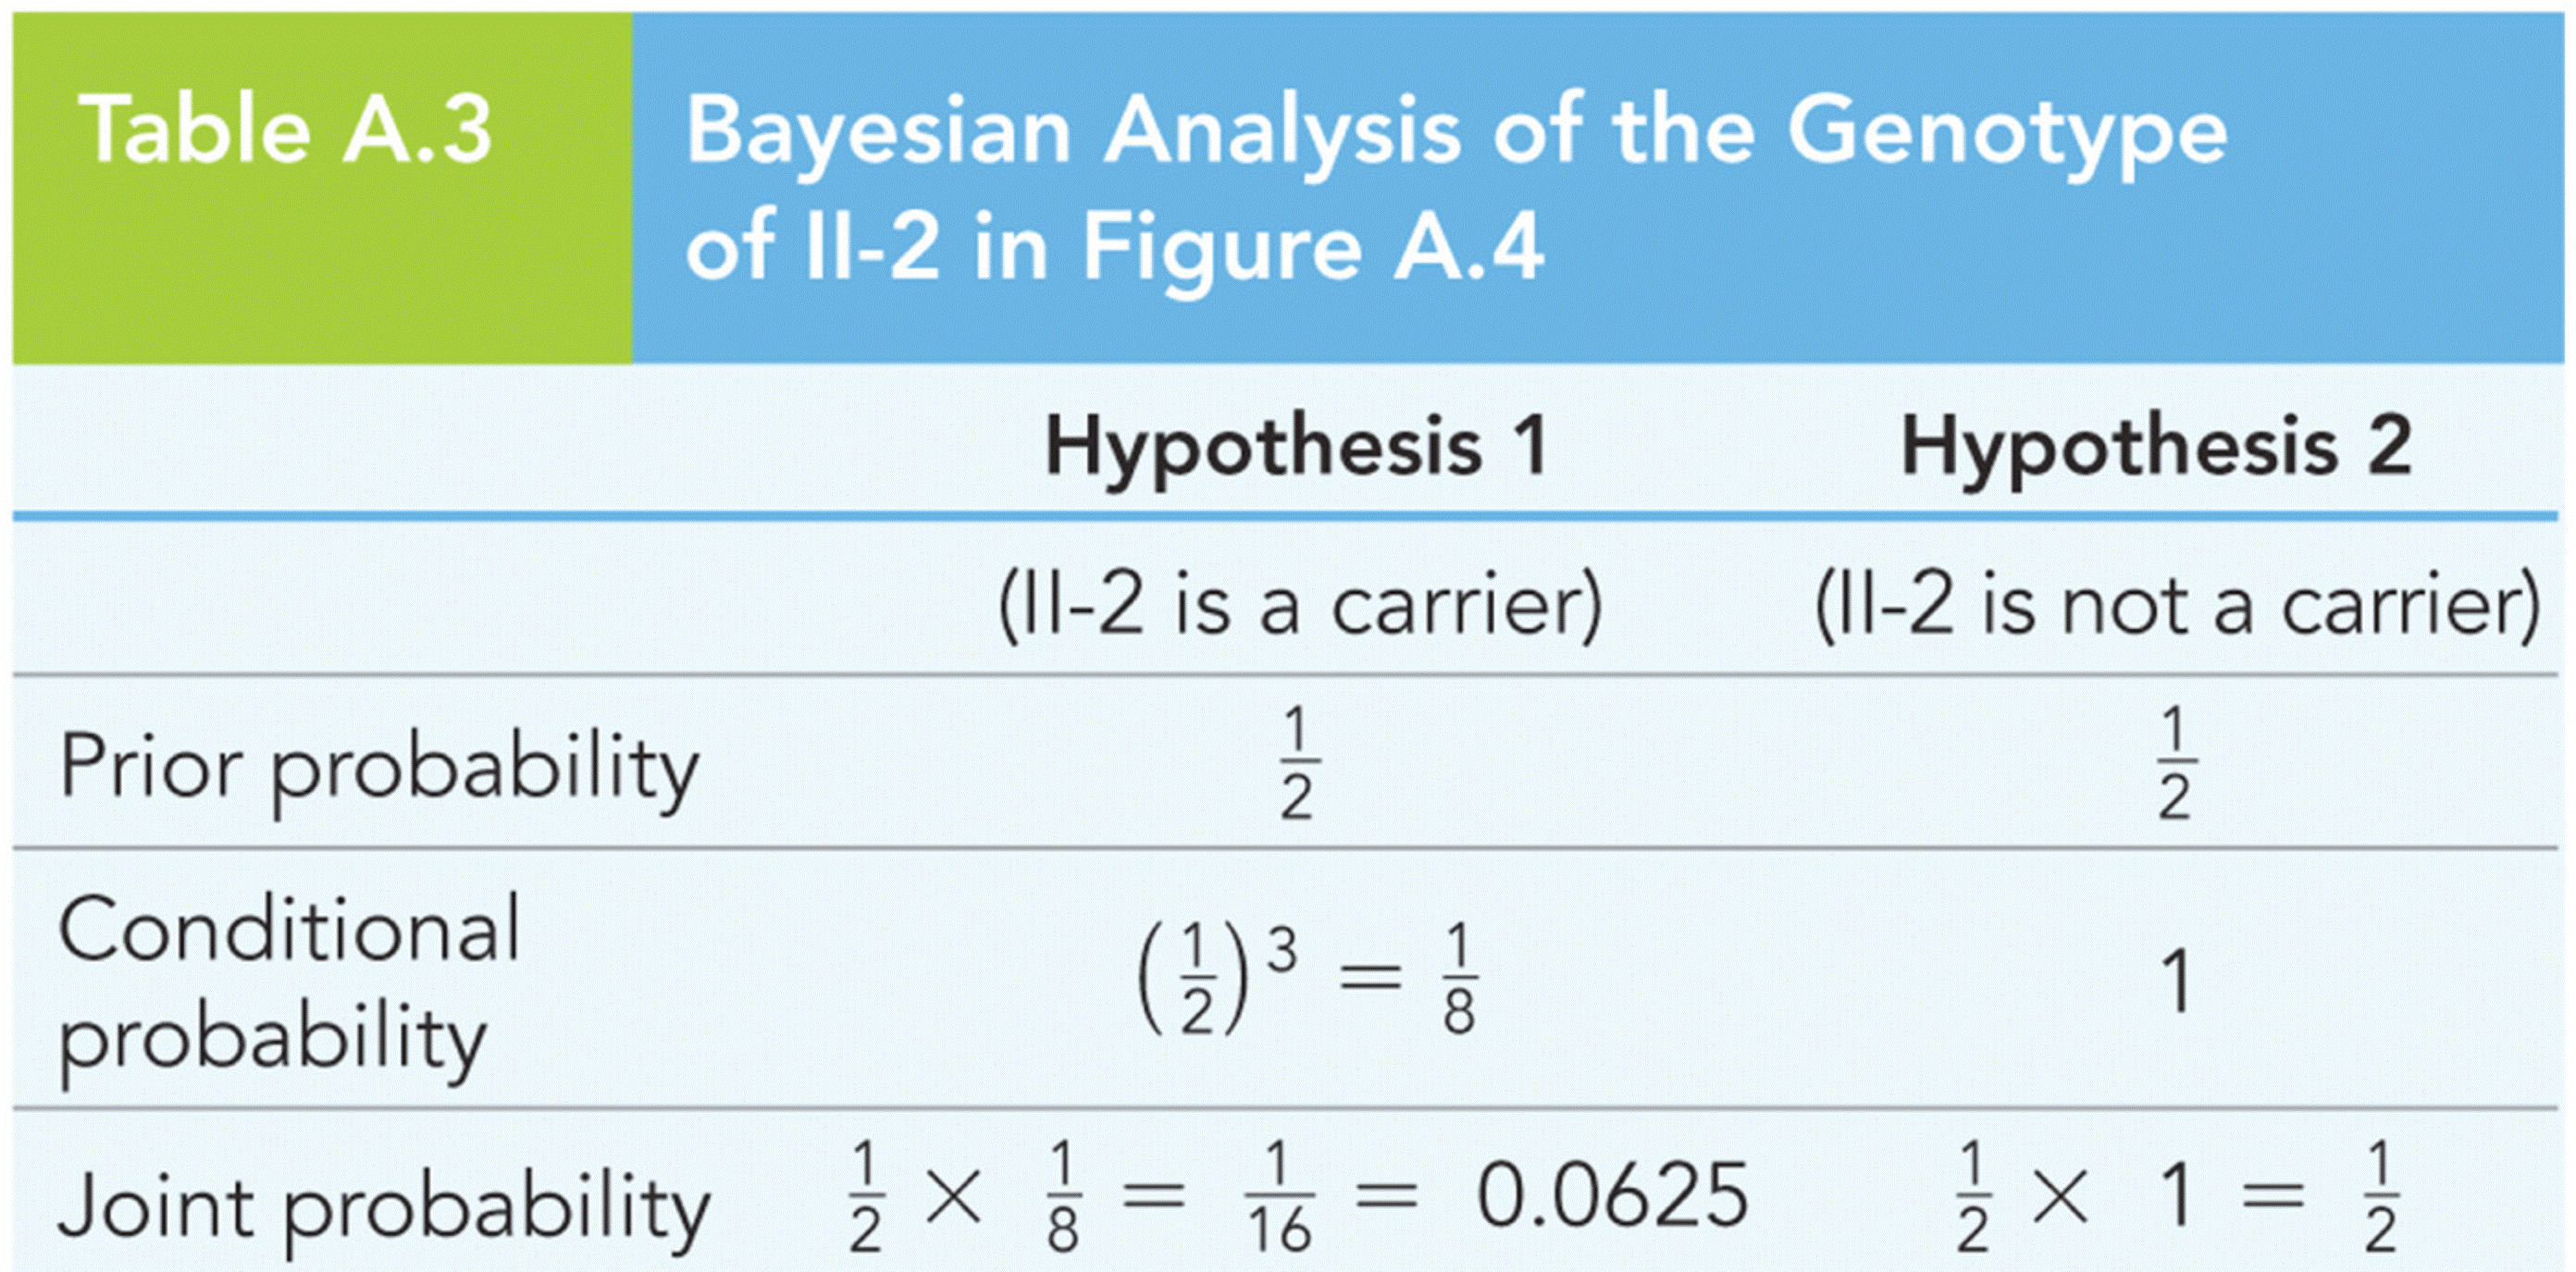 Bayesian Analysis of the Genotype of II-2 in Figure A.4